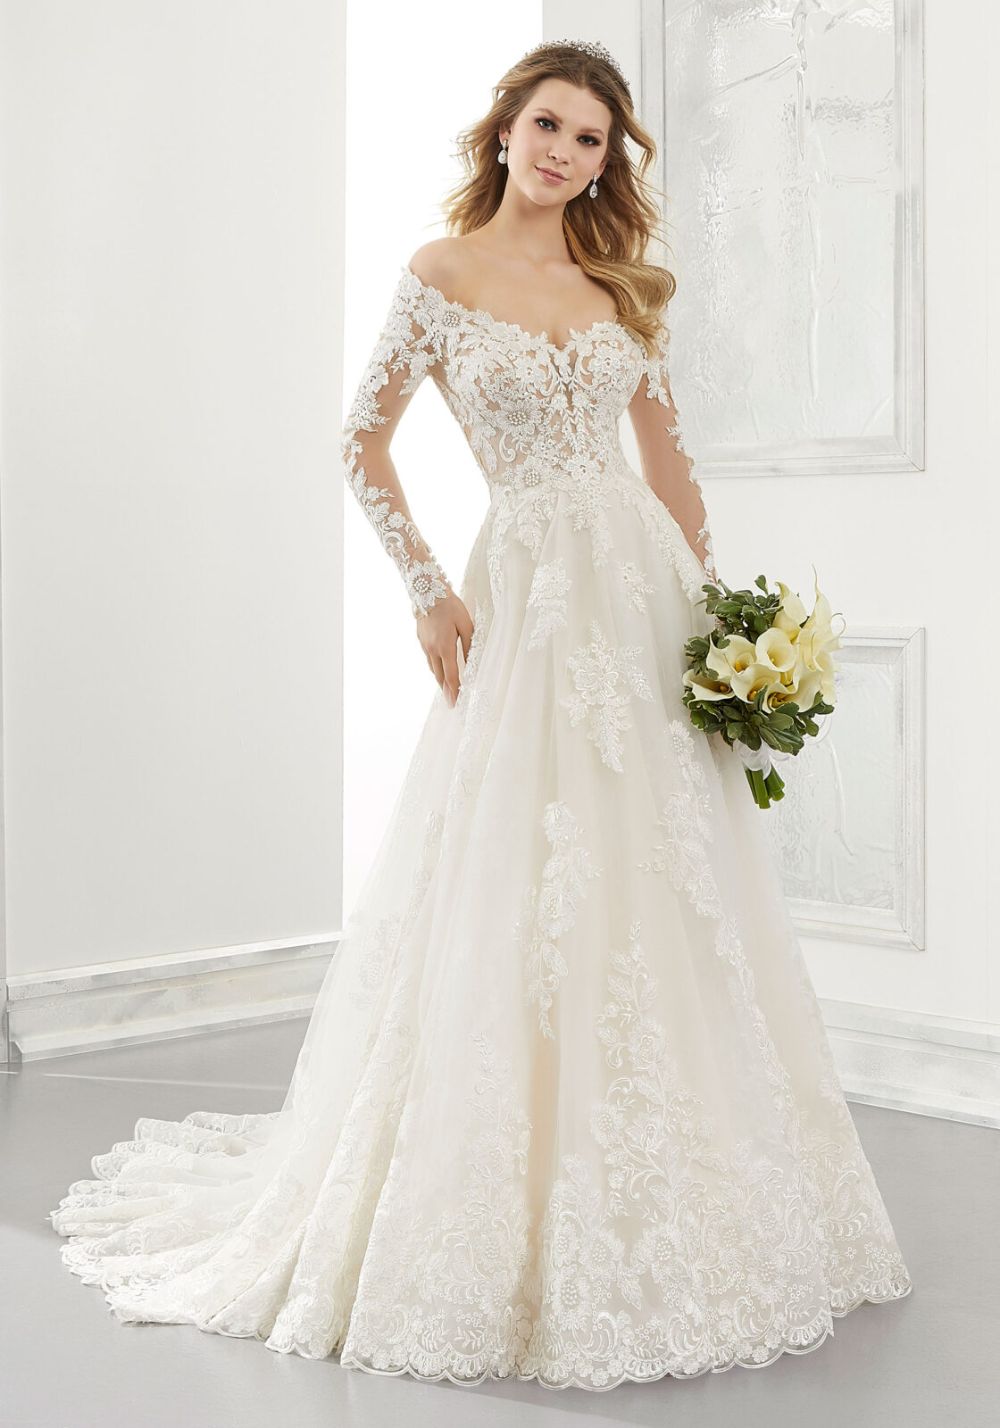 AMBROSIA 2196 by Mori Lee by Madeline Gardner